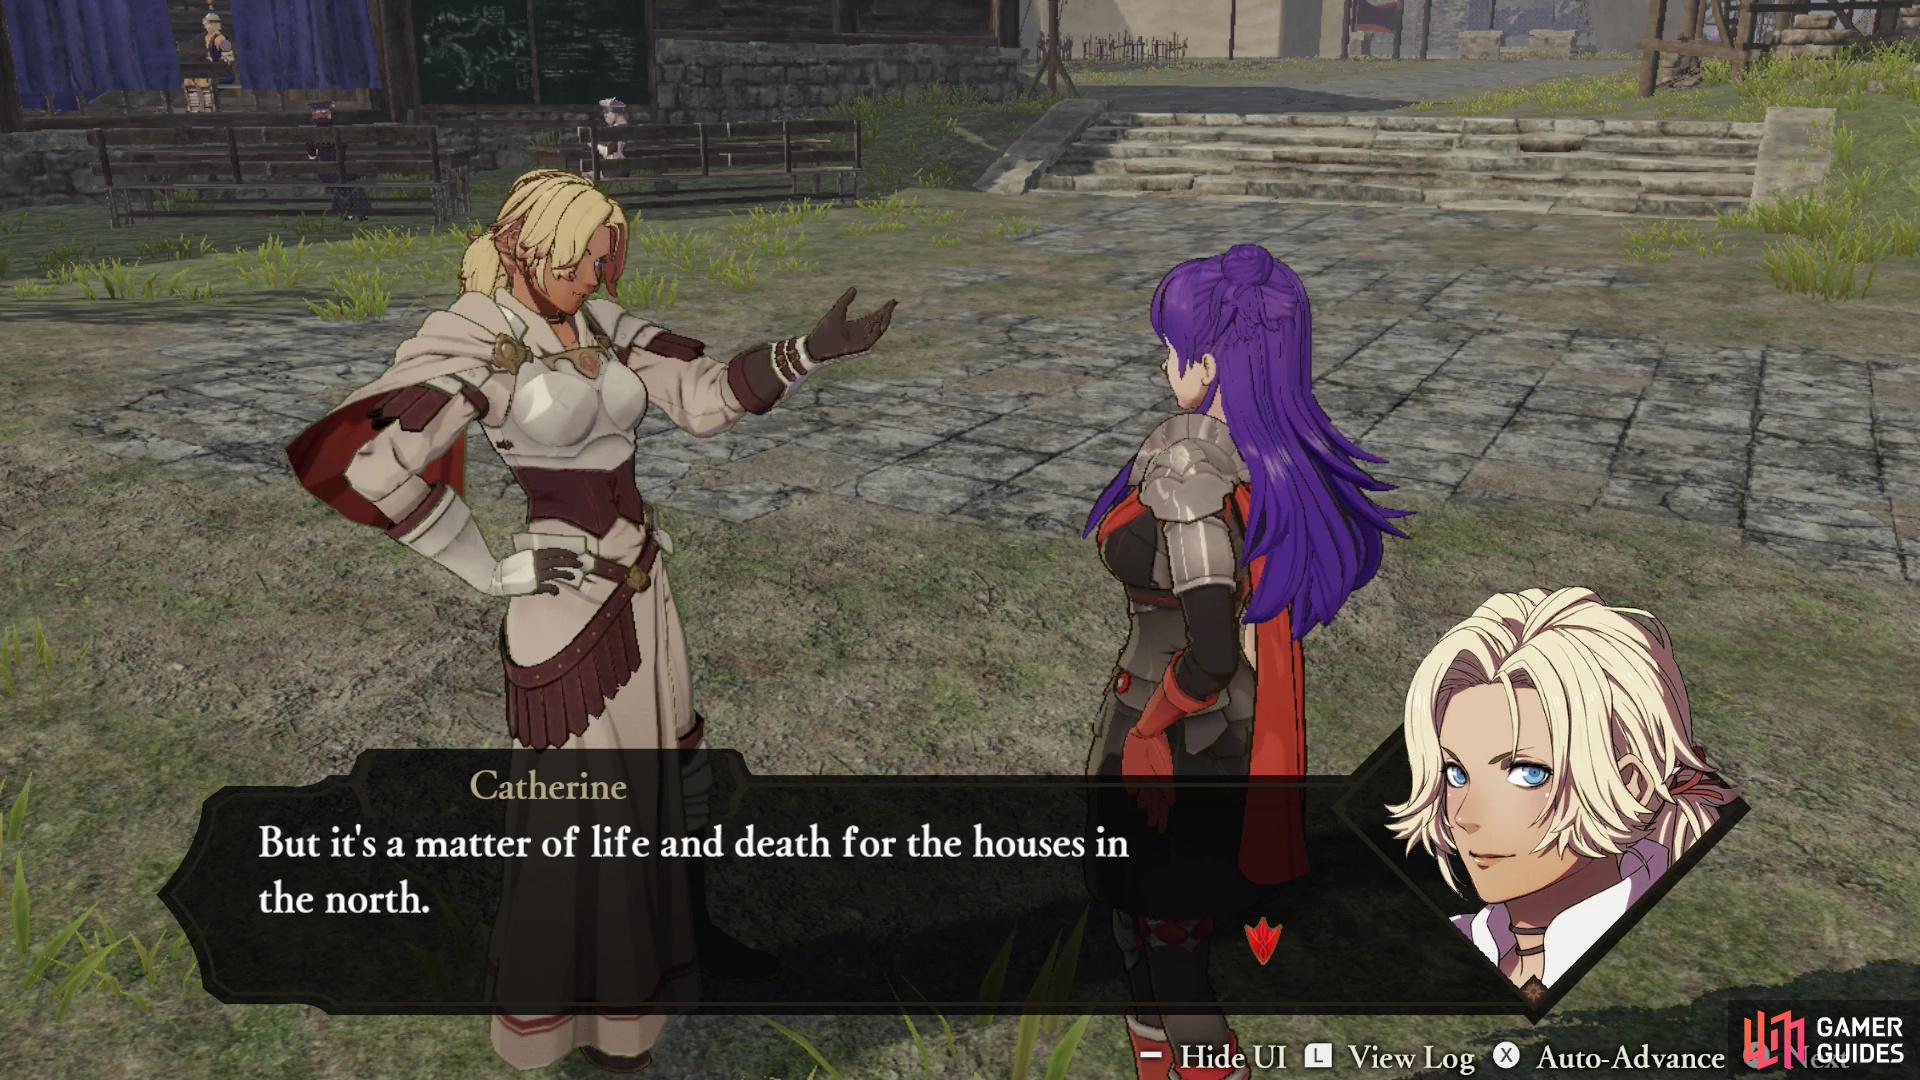 Some characters - namely Catherine and Seteth - will not have dialog options until later in the chapter.